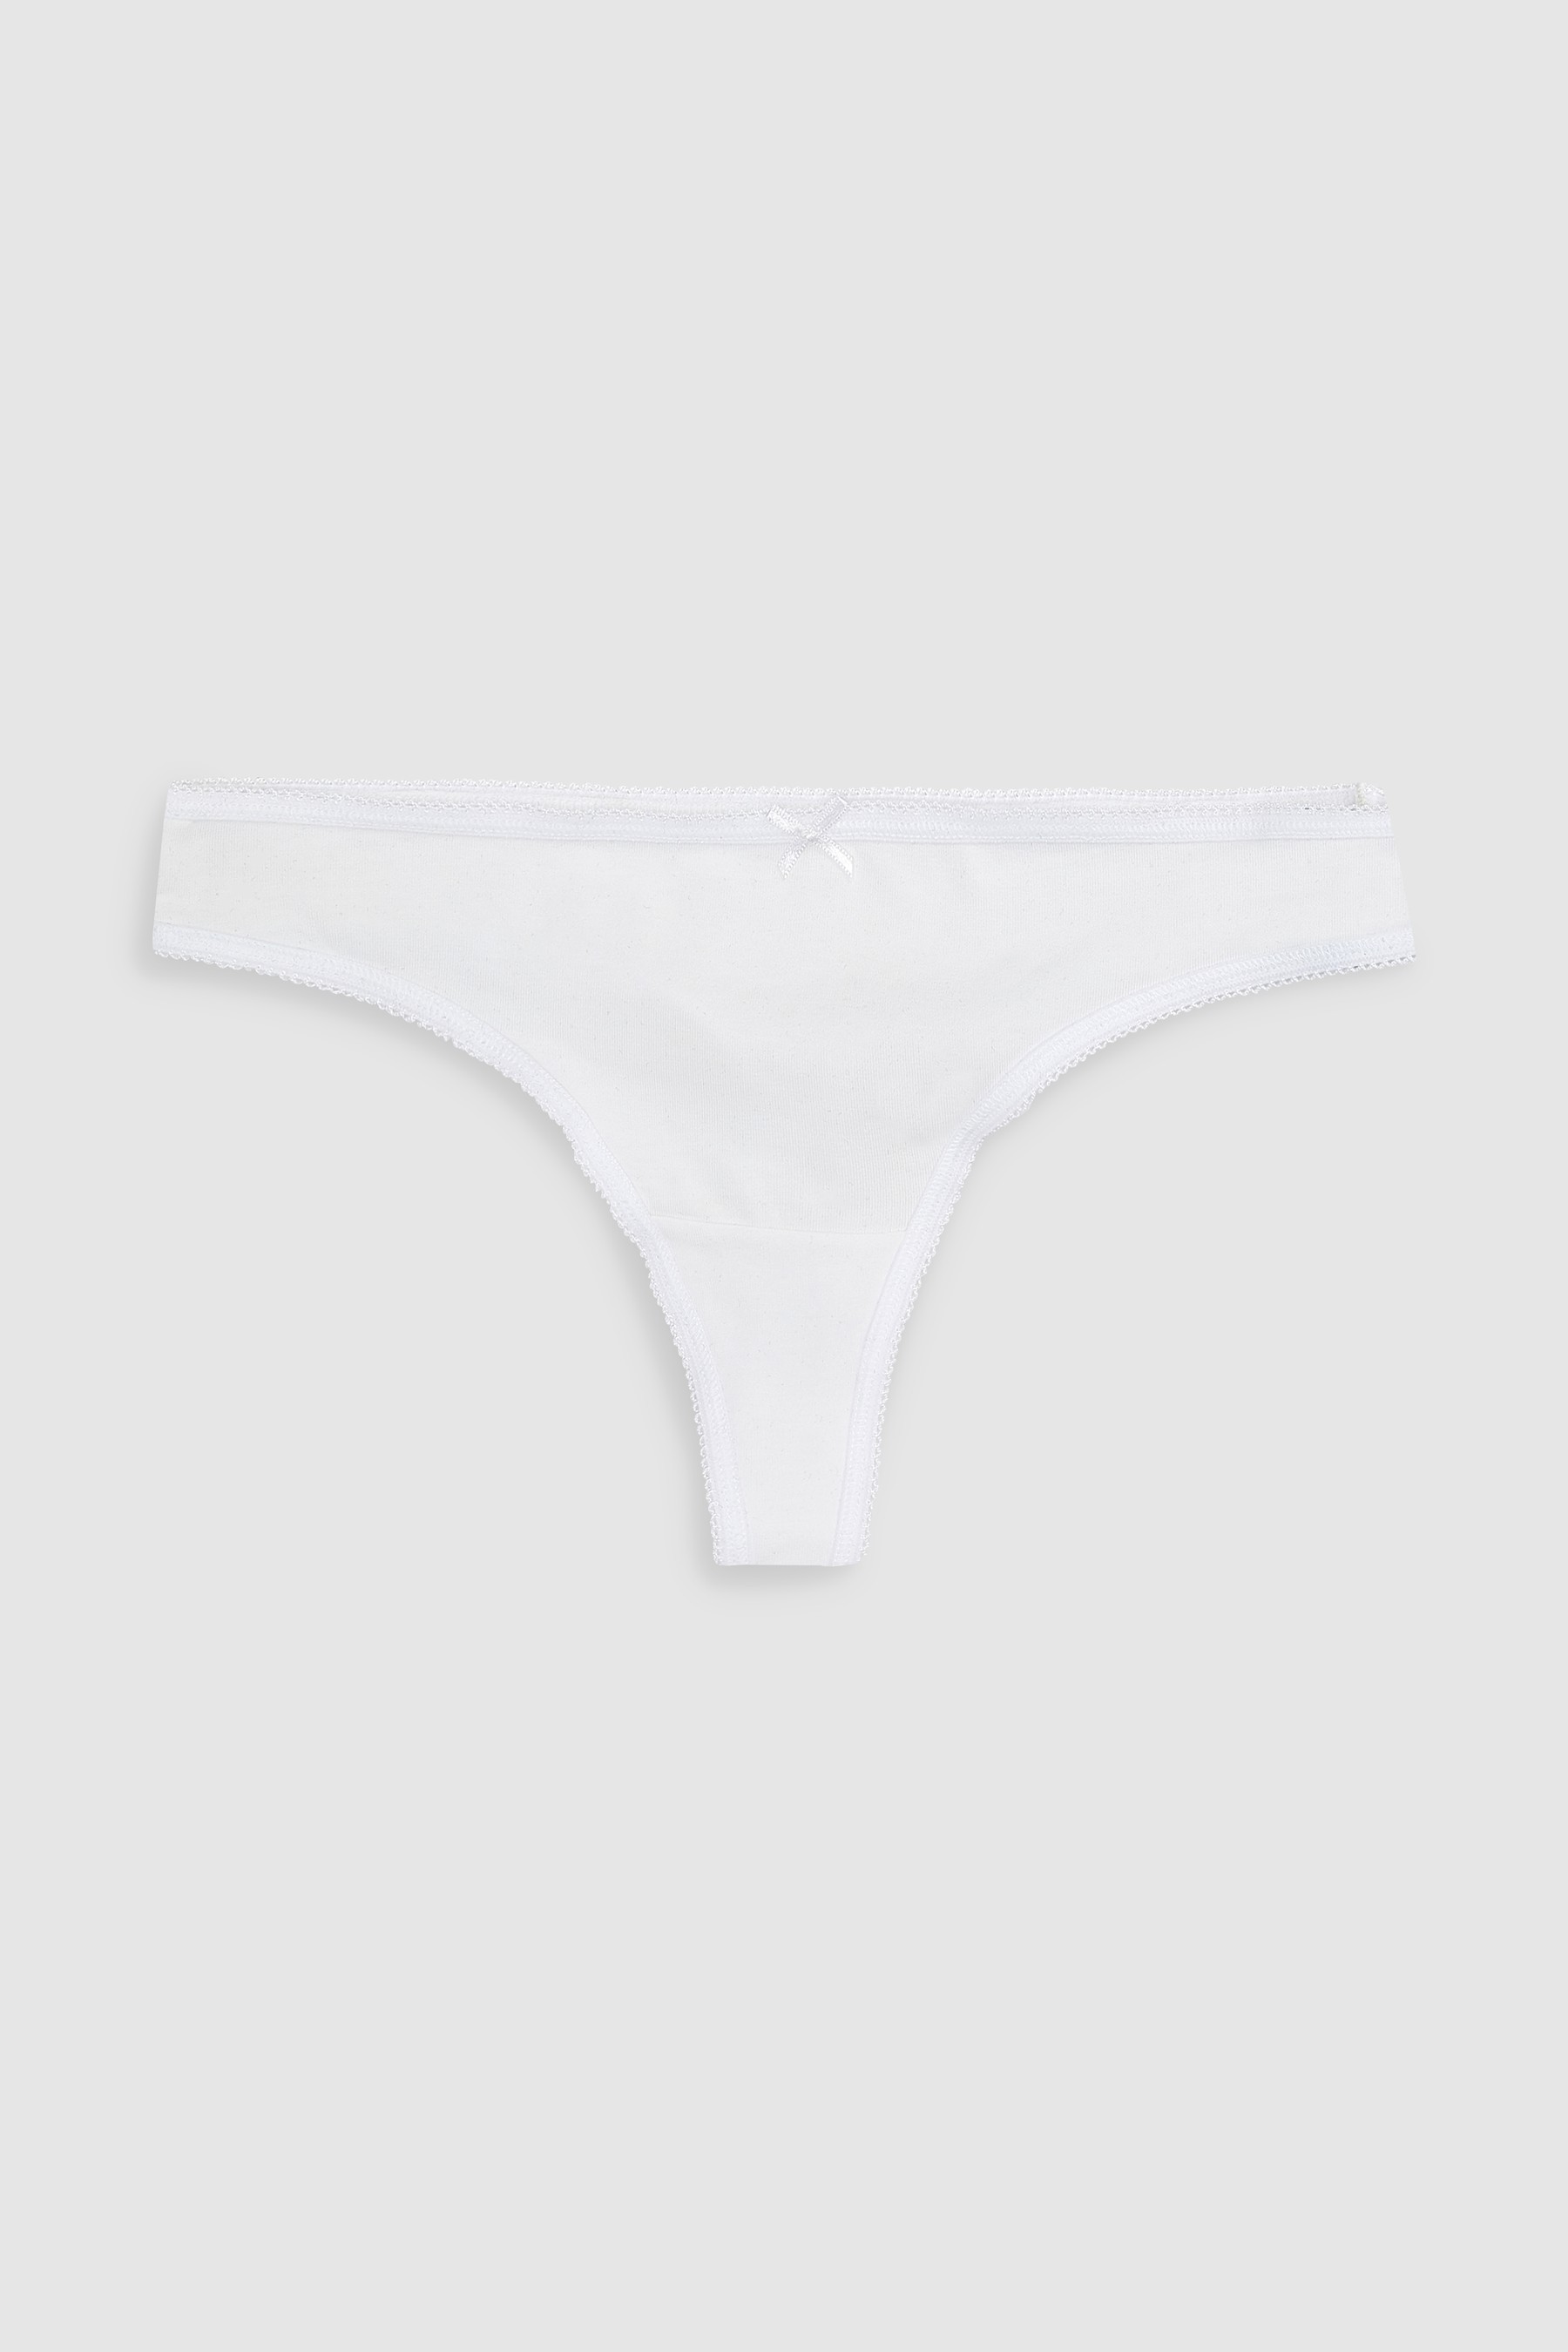 Cotton Rich Knickers 7 Pack Thong